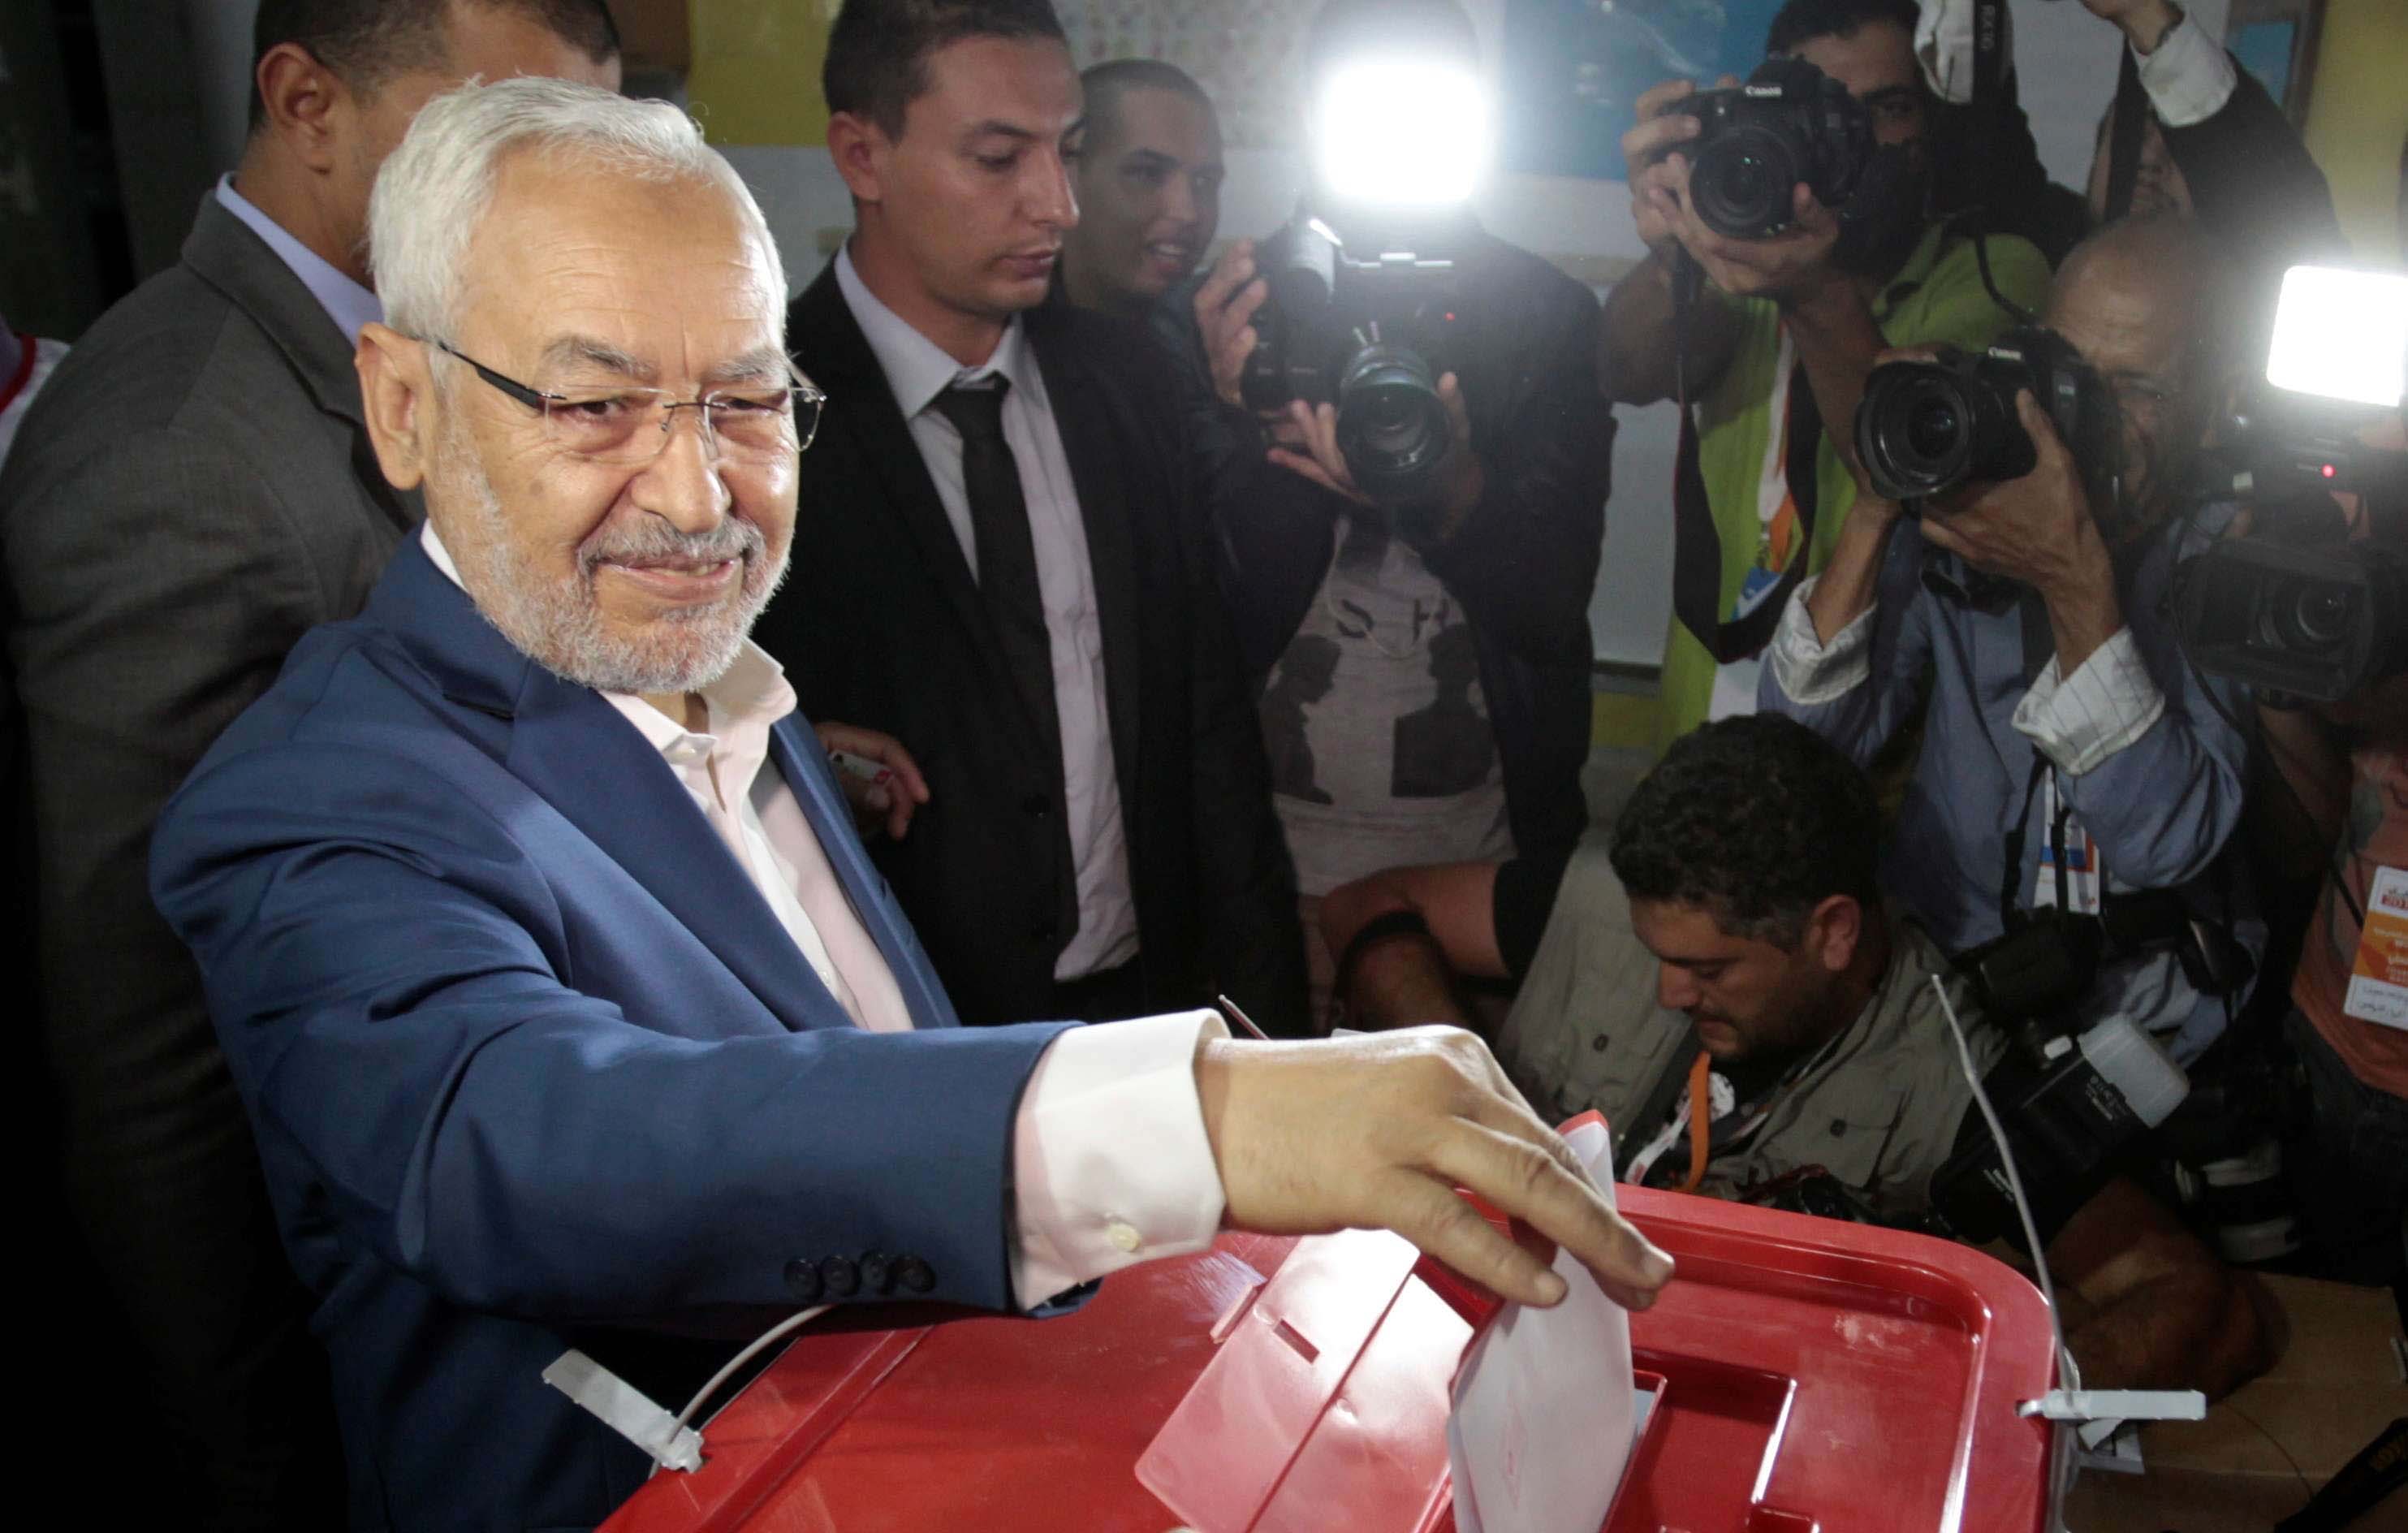 Ghannouchi's party under investigation